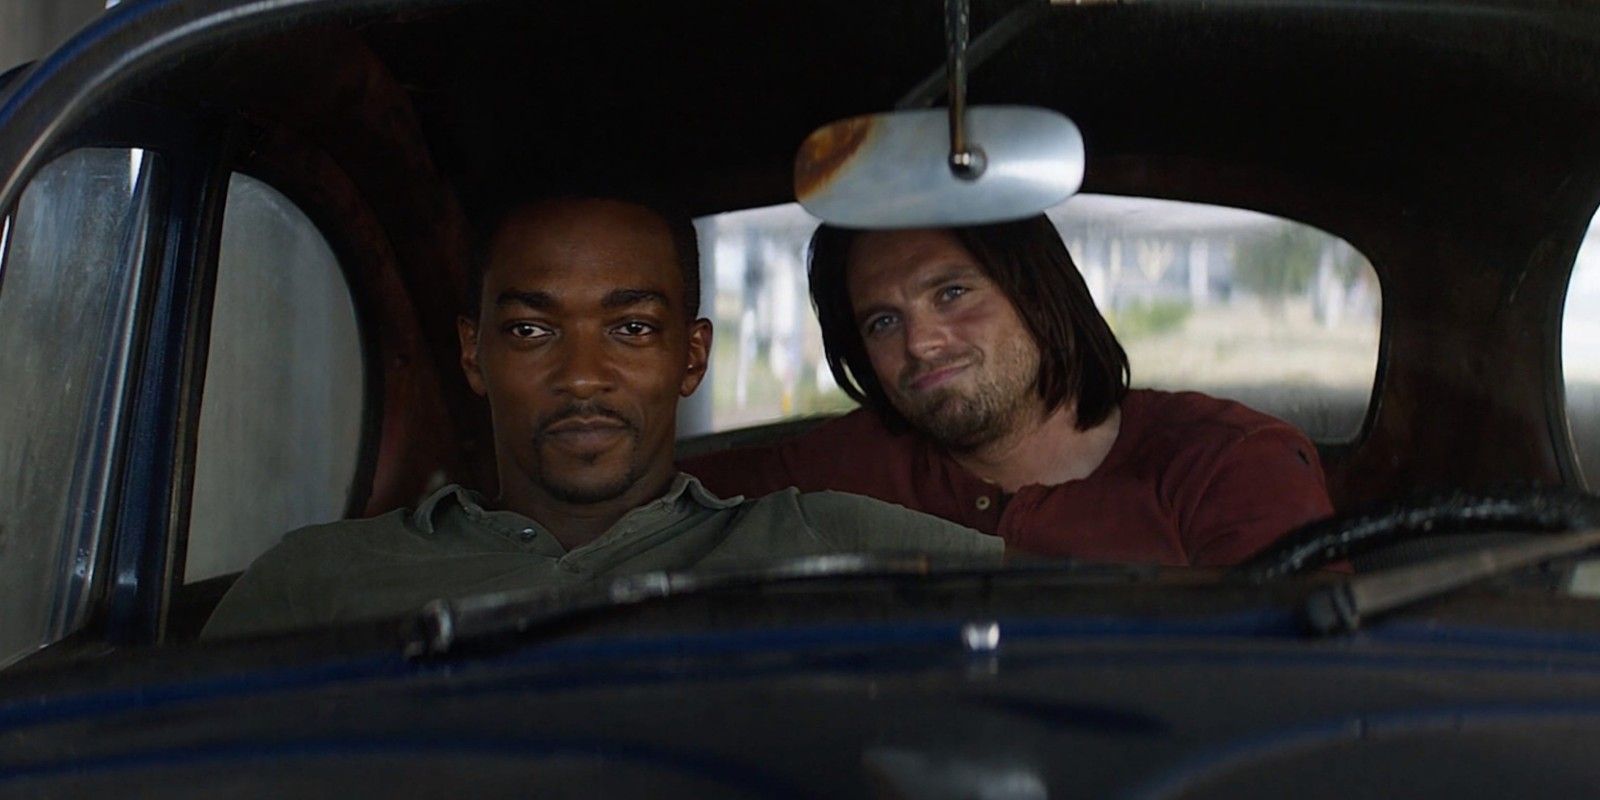 Sam and Bucky in Captain America Civil War in a car together